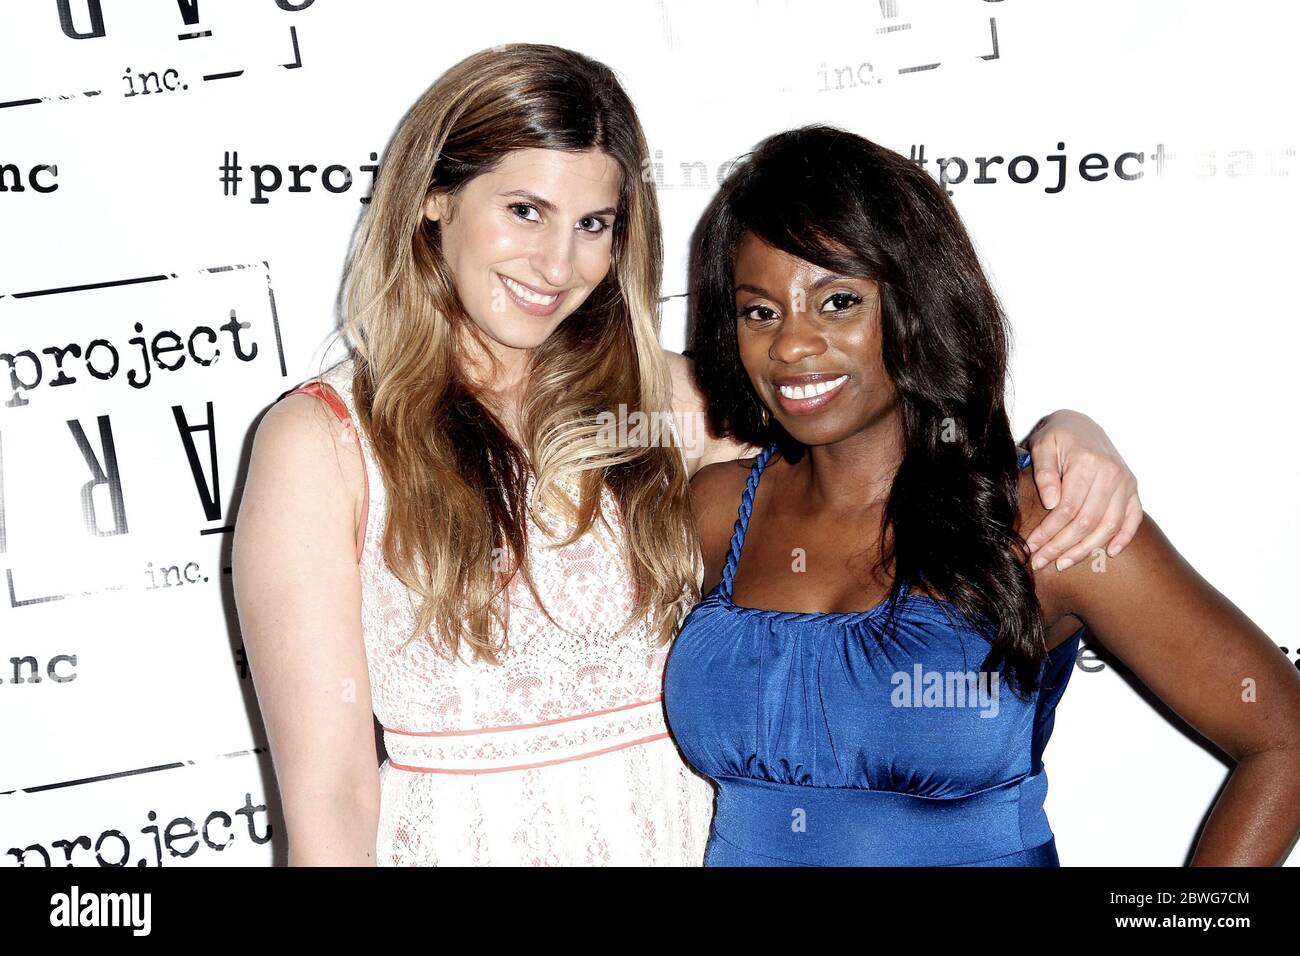 New York, NY, USA. 11 June, 2015. Associate Producer at NBC Universal's Bravo TV, Chanel Omari, Co-host of VH1's morning show 'The Gossip Table', Delaina Dixon at the Launch Of Dining Reconstructed: An Off Menu Experience at The Starrett Leigh Building. Credit: Steve Mack/Alamy Stock Photo